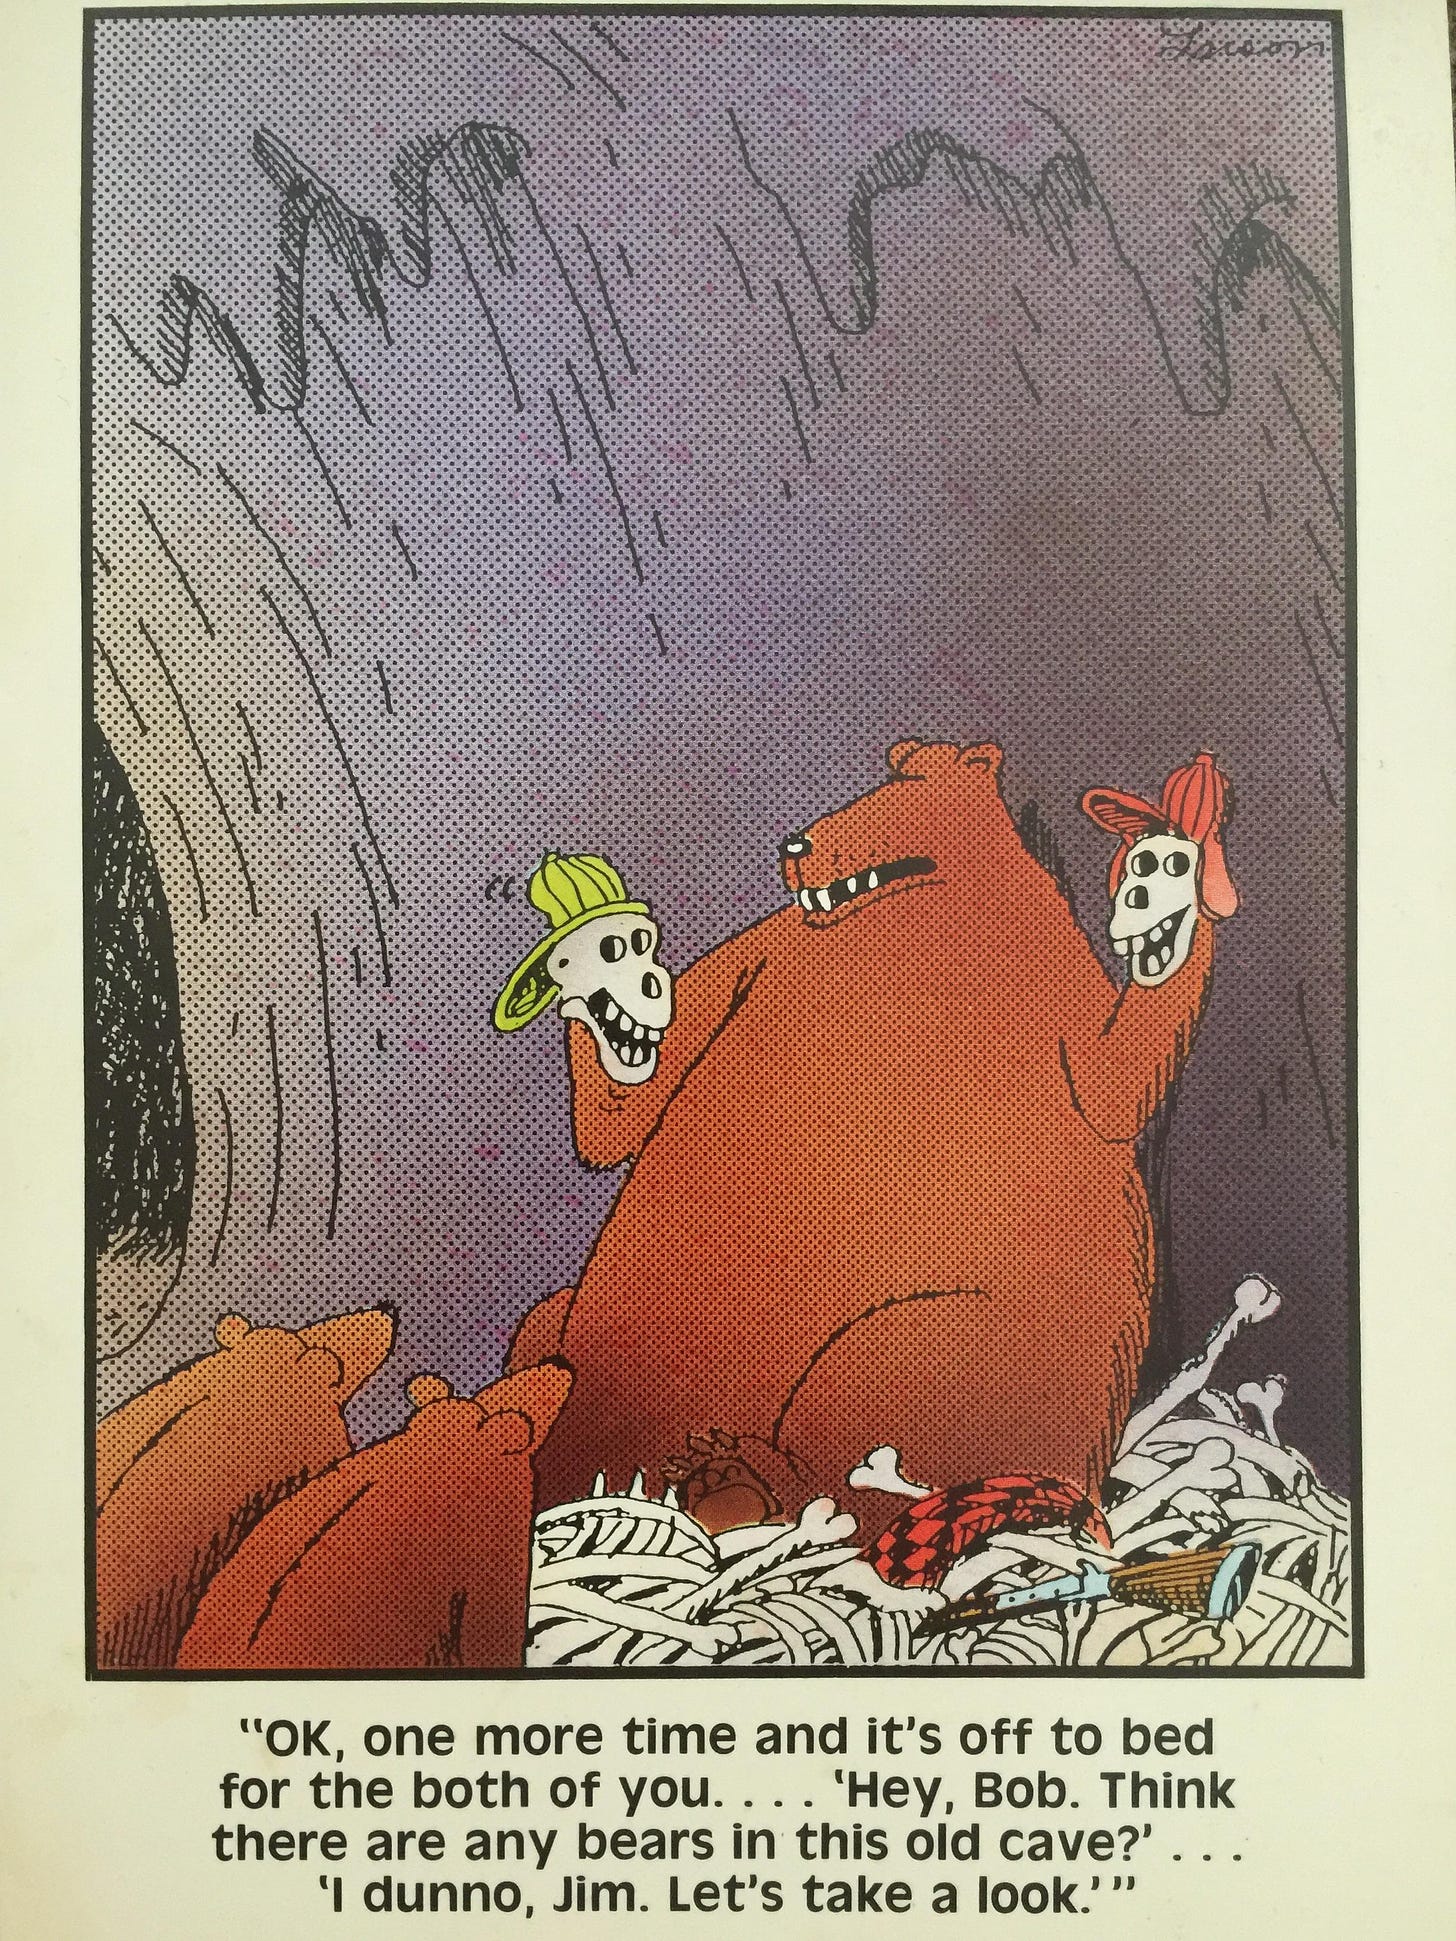 This Far Side card from 1984 I found while packing to move. : r/funny